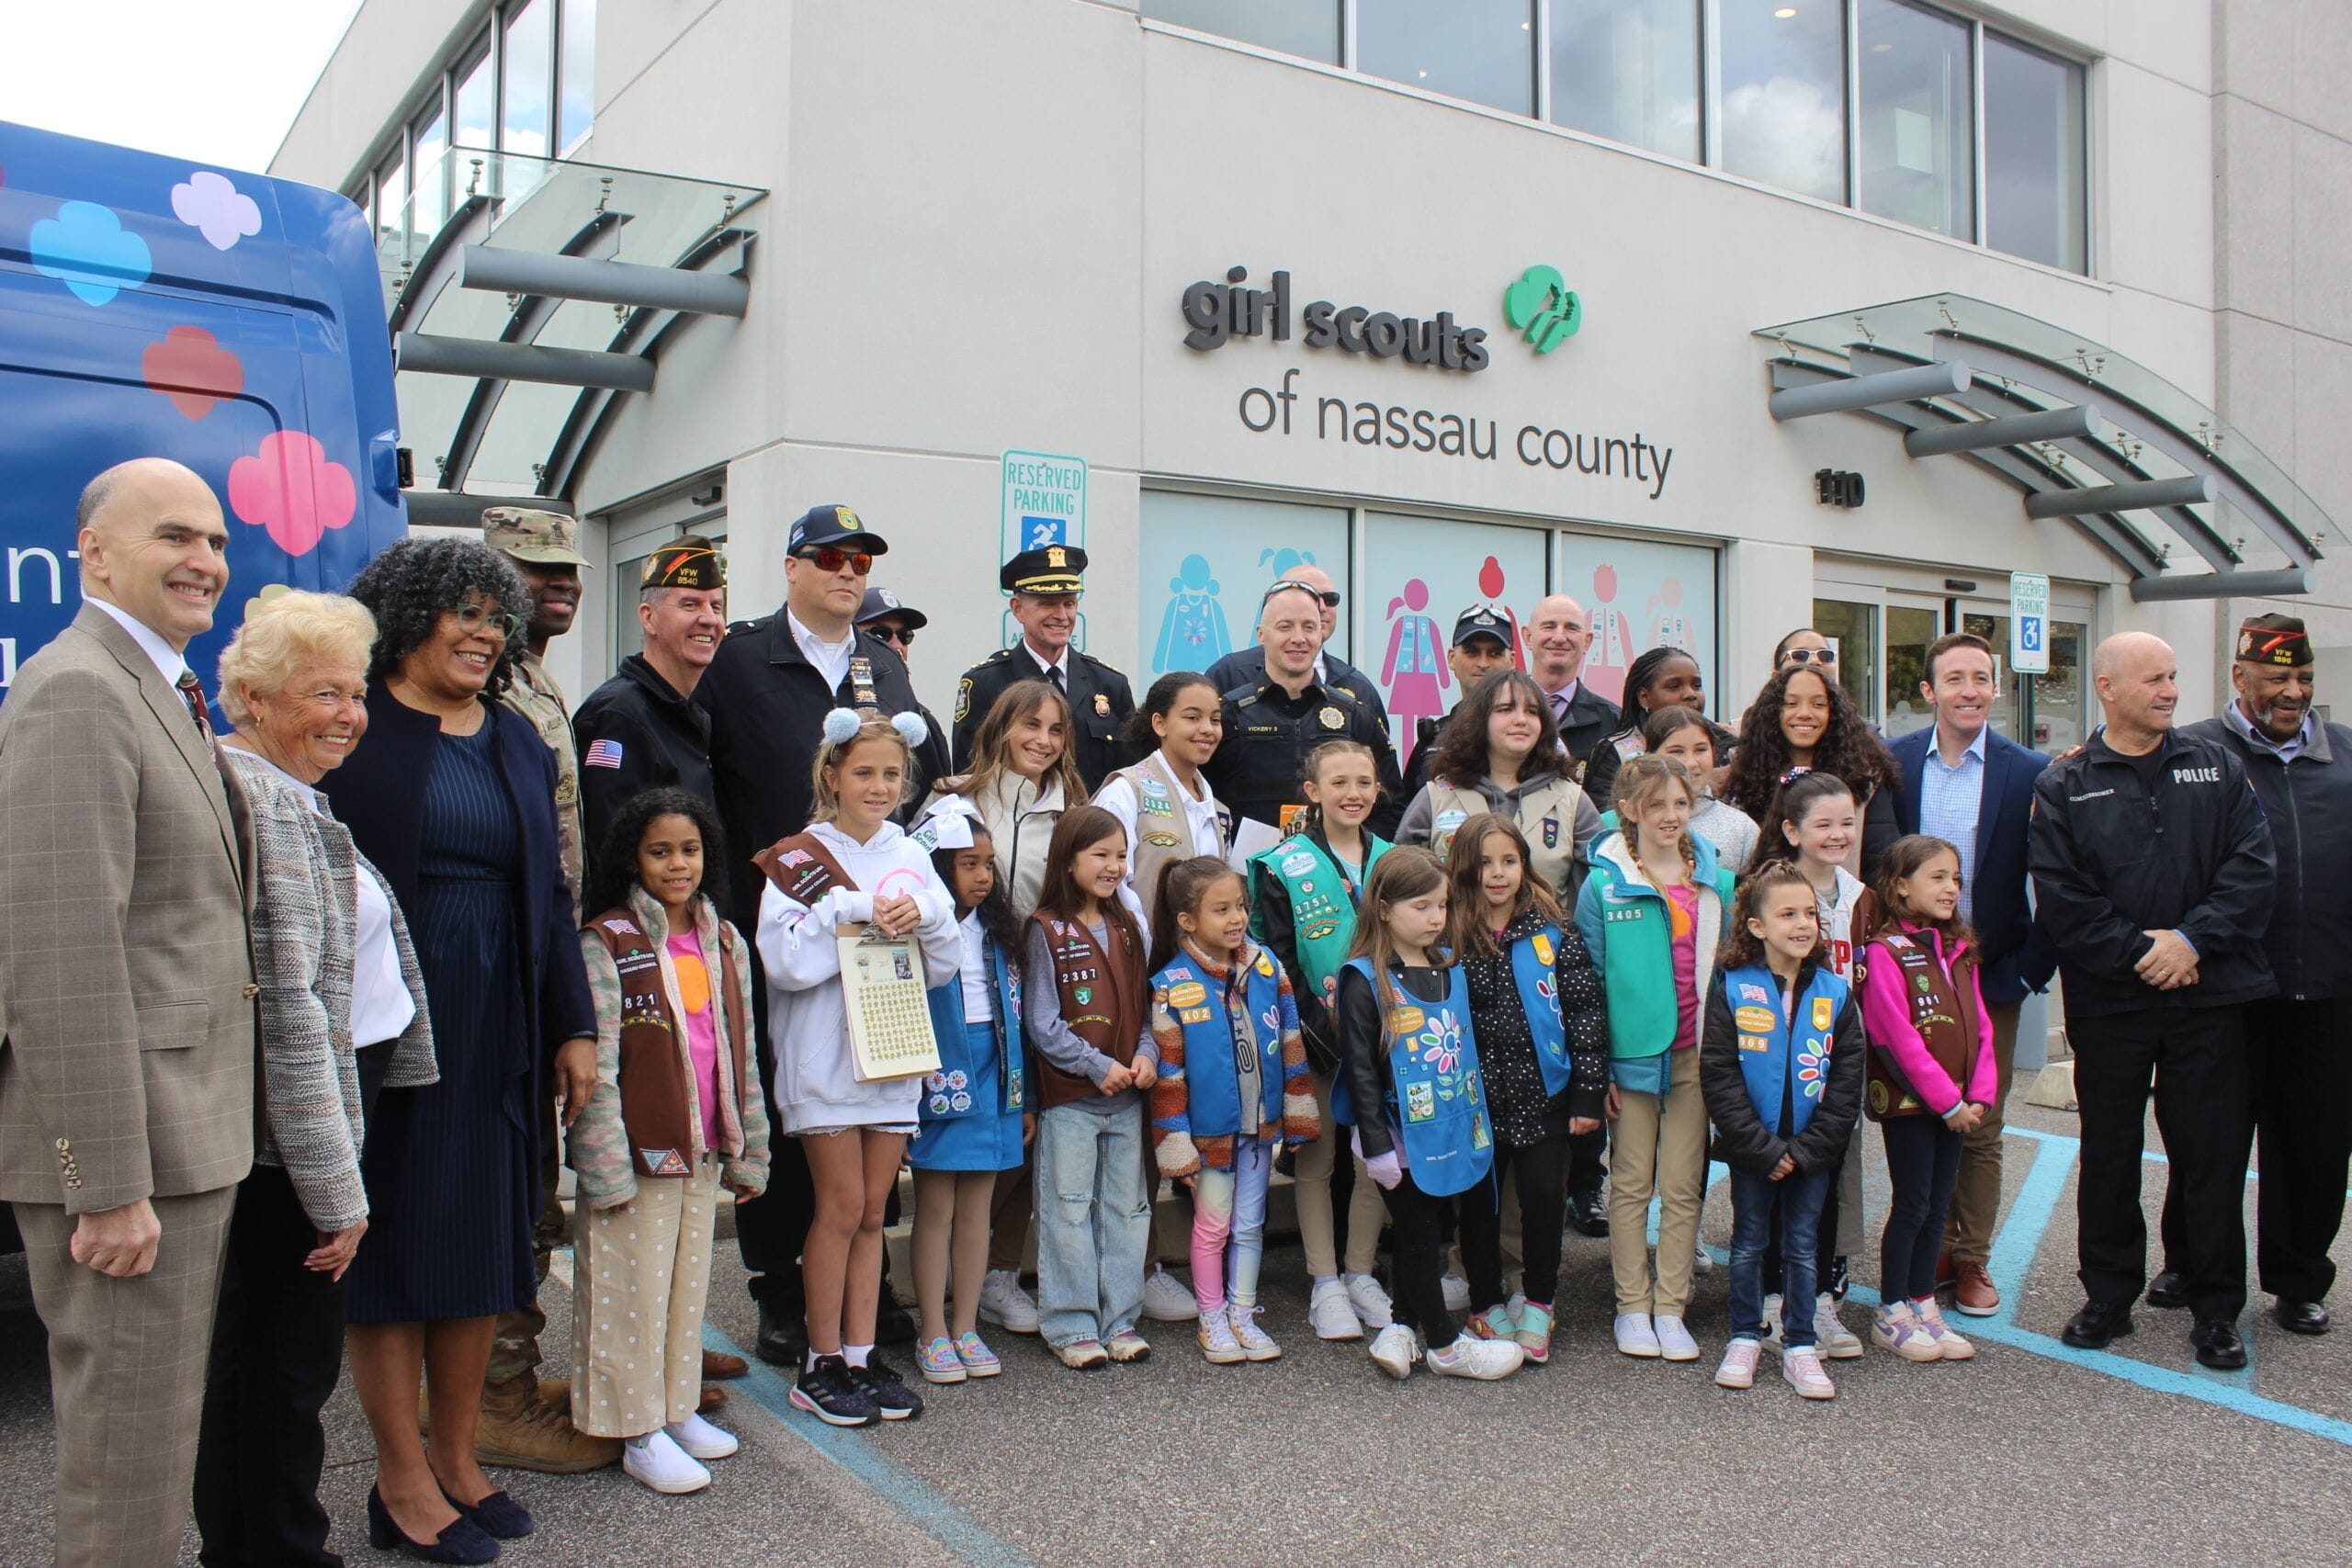 A Sweet Way To Say Thanks: Girl Scouts Of Nassau County Send Troops, Local Heroes Over 80,000 Cookie Packages